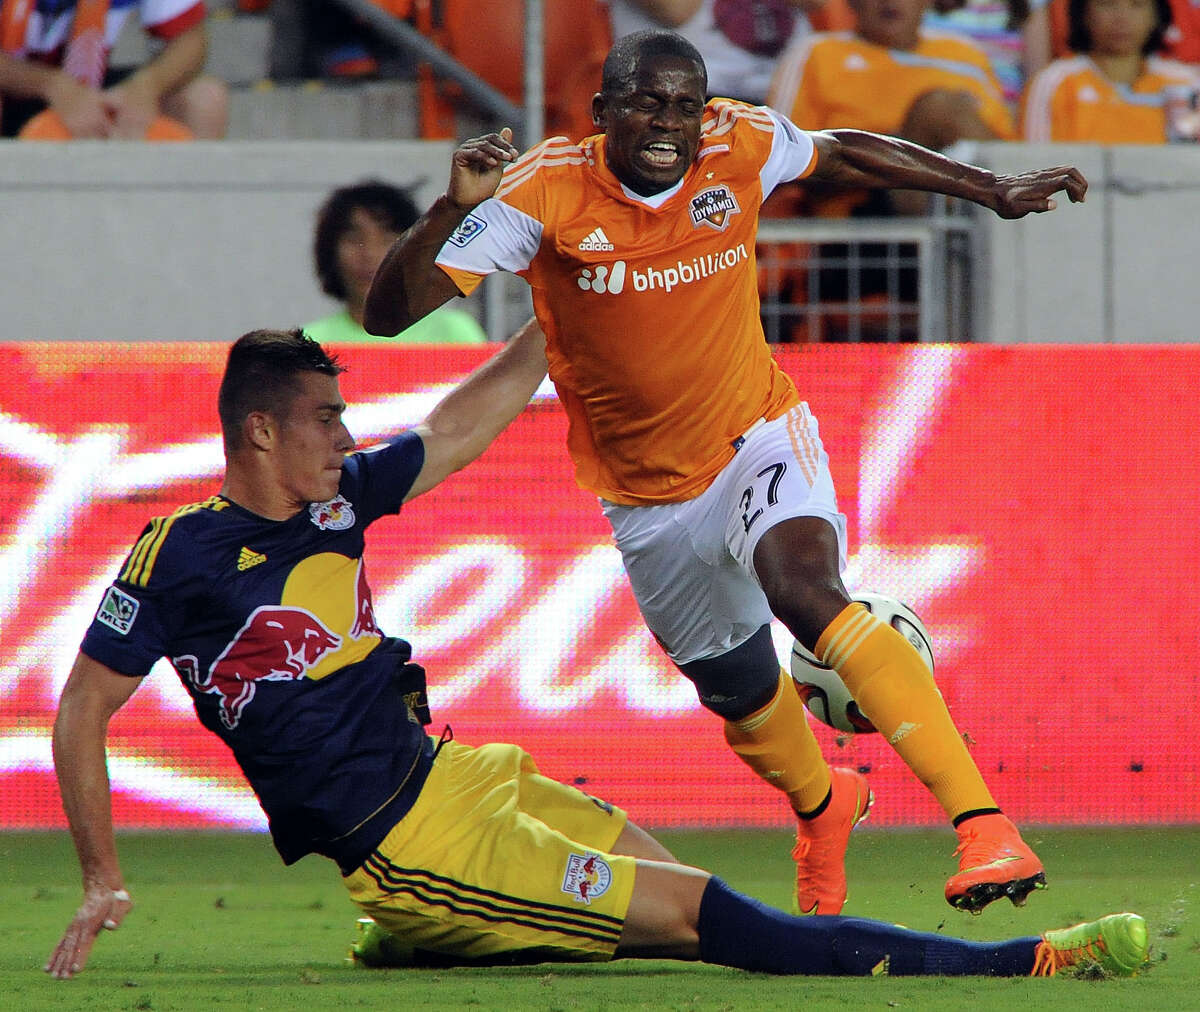 The return of Boniek Garcia, right, from World Cup play boosted the Dynamo's roster, but the team has a long way to go to be in playoff contention.﻿